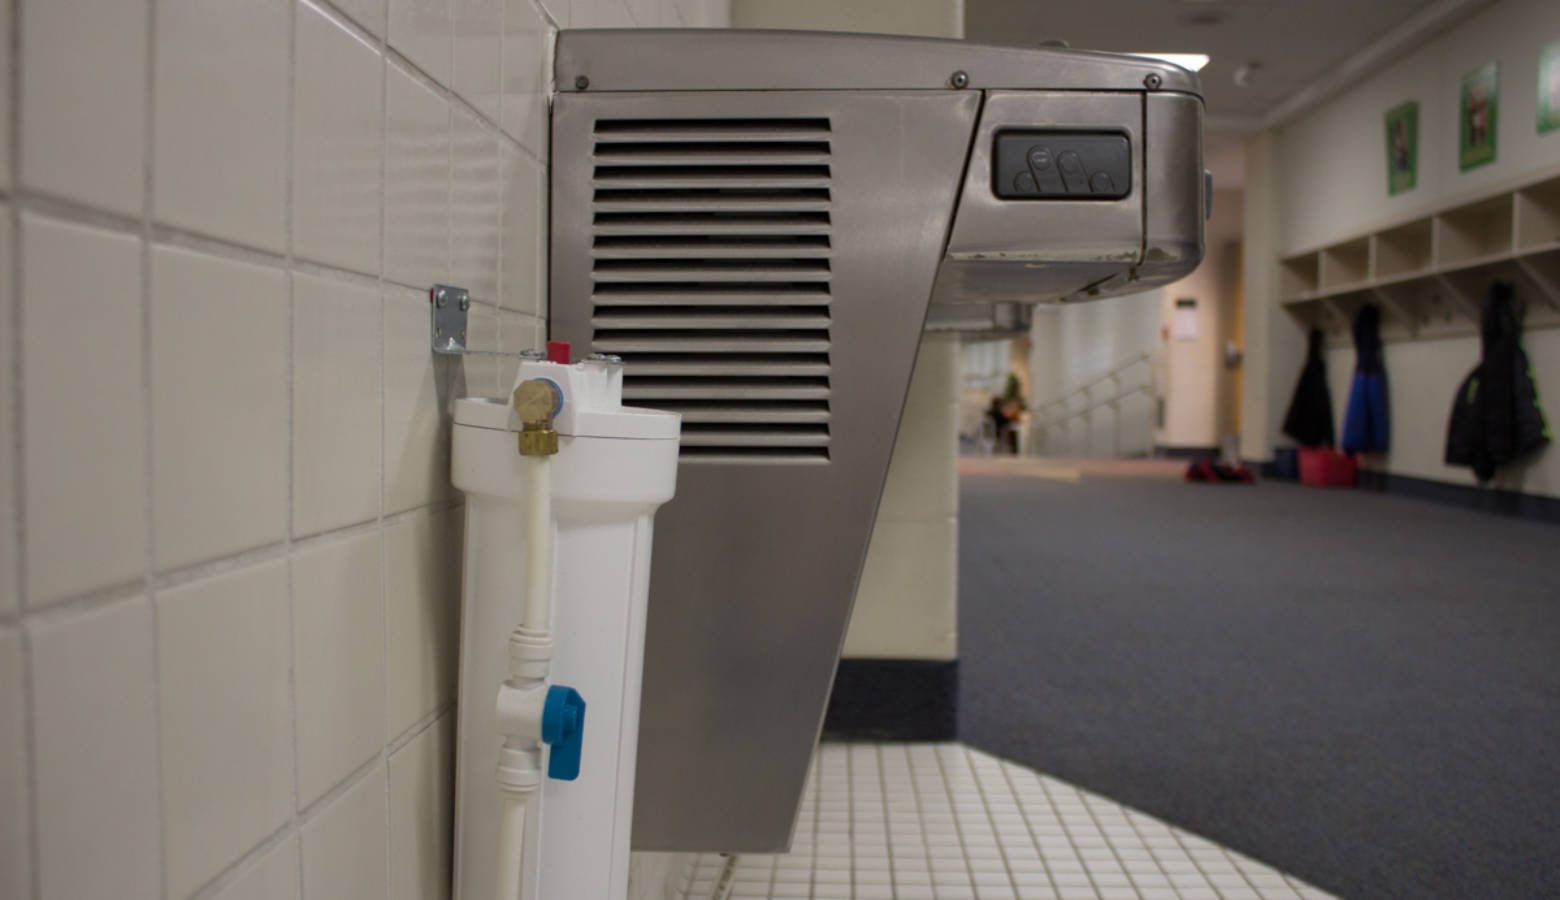 After a lead scare in October 2015, Eastern Howard Elementary School installed water filters on all their drinking water sources. (Nick Janzen/IPBS)